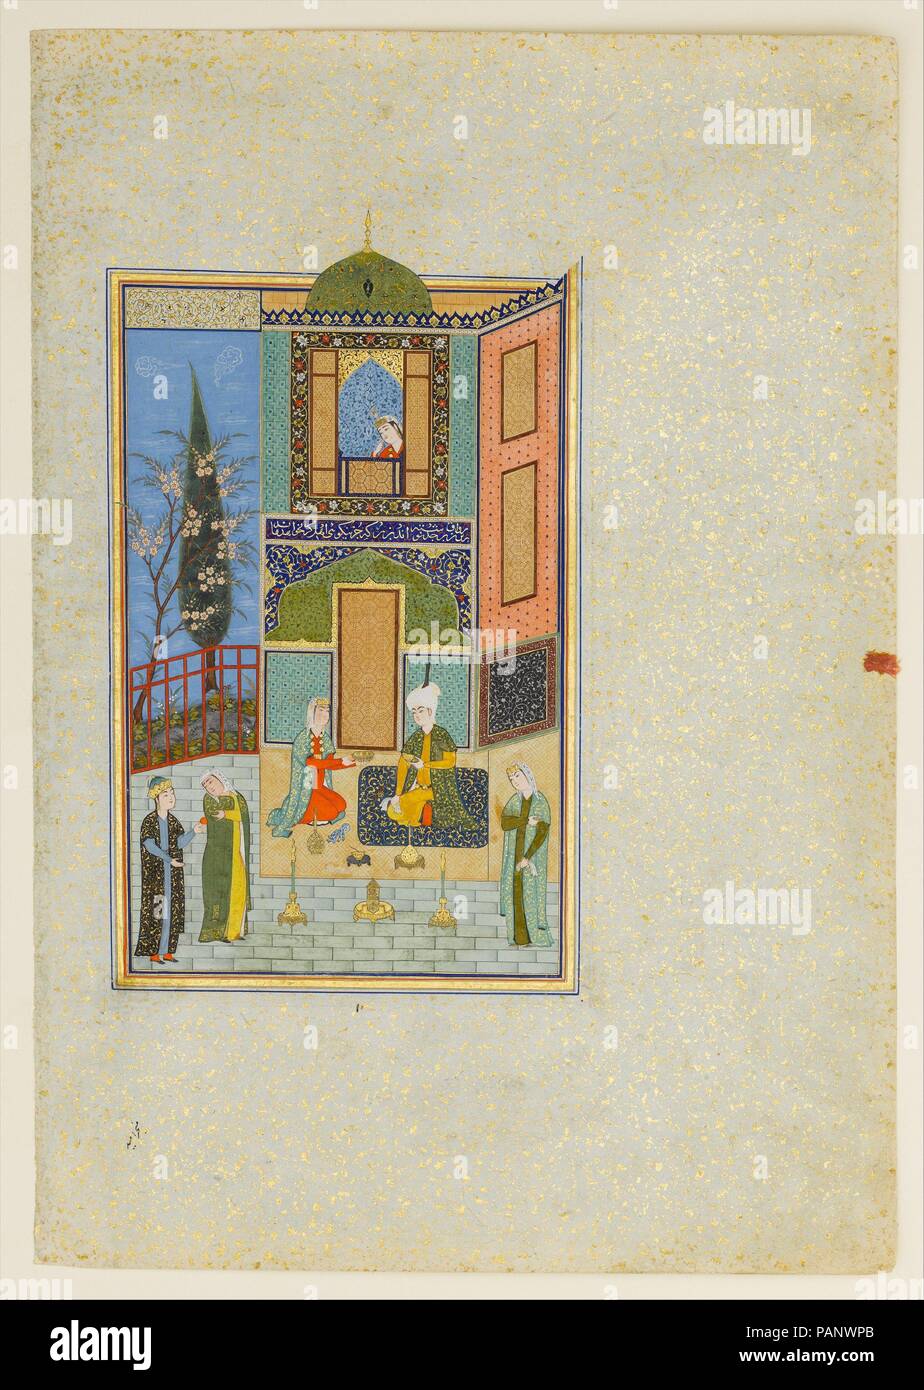 'Bahram Gur in the Green Palace on Monday', Folio from a Khamsa (Quintet) of Nizami. Author: Nizami (Ilyas Abu Muhammad Nizam al-Din of Ganja) (probably 1141-1217). Dimensions: Painting: H. 7 1/4 in. (18.4 cm)   W. 5 in. (12.7 cm)  Page: H. 12 3/4 in. (32.4 cm)   W. 8 5/8 in. (21.9 cm)  Mat: H. 19 1/4 in. (48.9 cm)   W. 14 1/4 in. (36.2 cm). Date: A.H. 931/A.D. 1524-25.  The Haft Paikar (Seven Portraits) is one of the five poems of the Khamsa of Nizami.  The poetry is mystical, illustrating the supremacy of divine love over earthly pleasures.  In the story, Bahram Gur marries seven princesses  Stock Photo